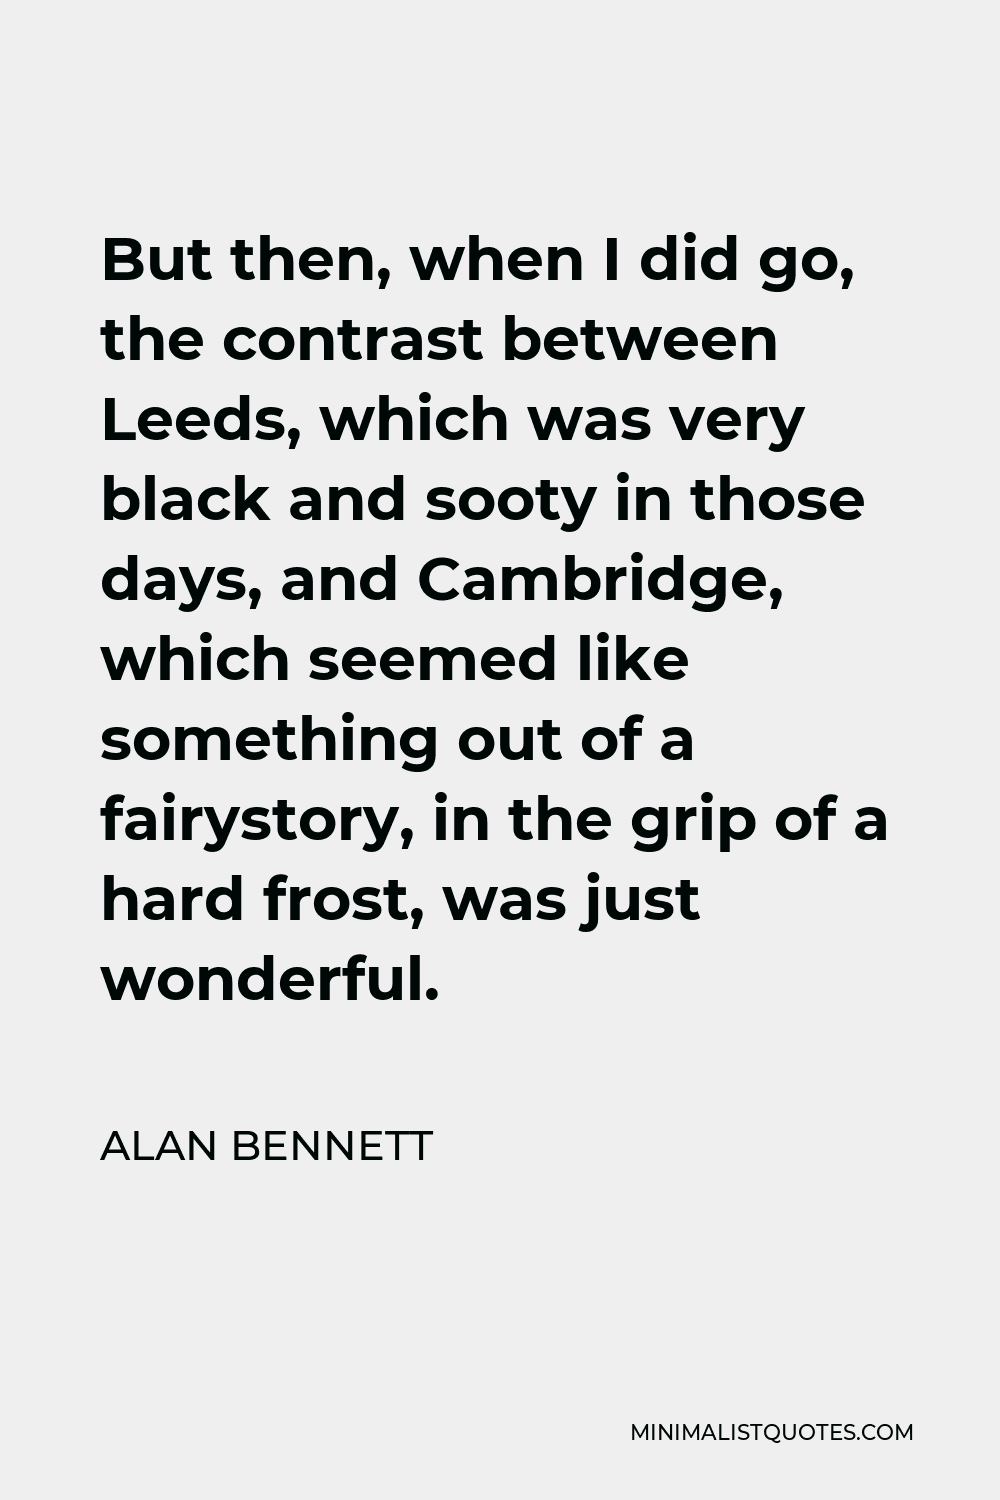 Alan Bennett Quote - But then, when I did go, the contrast between Leeds, which was very black and sooty in those days, and Cambridge, which seemed like something out of a fairystory, in the grip of a hard frost, was just wonderful.